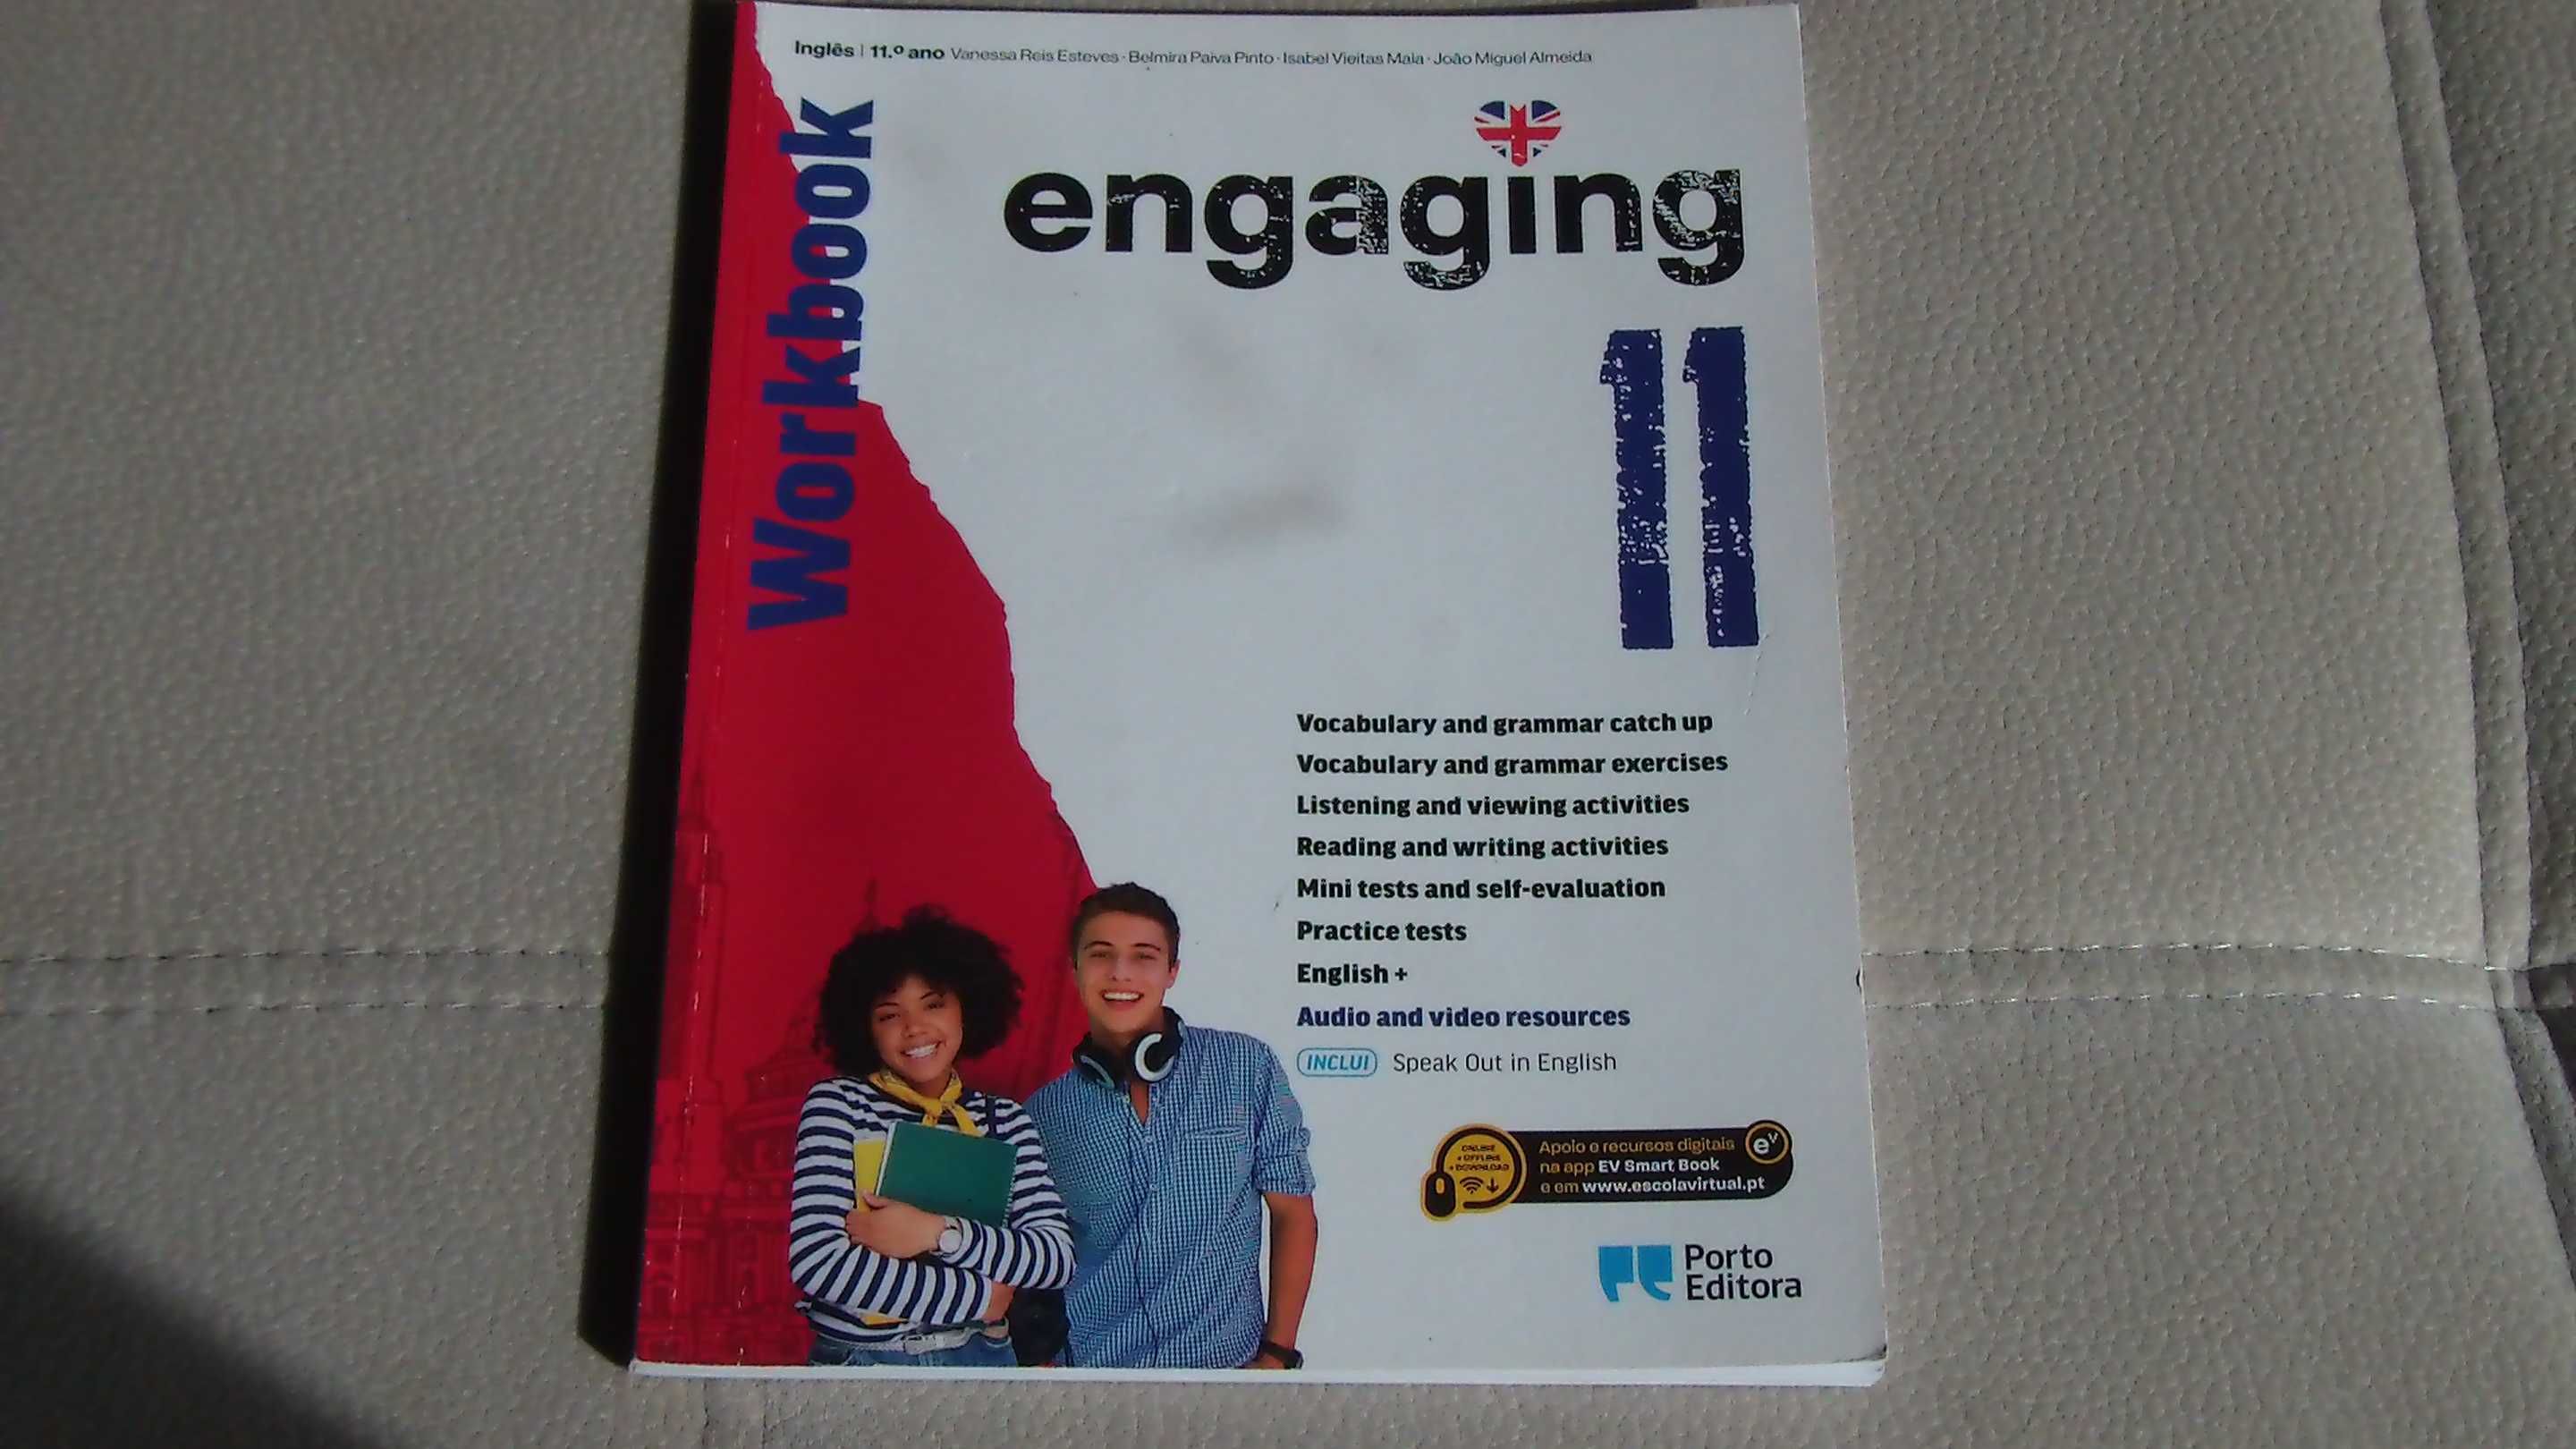 Engaging 11 Workbook/Spear Out in English Porto editora